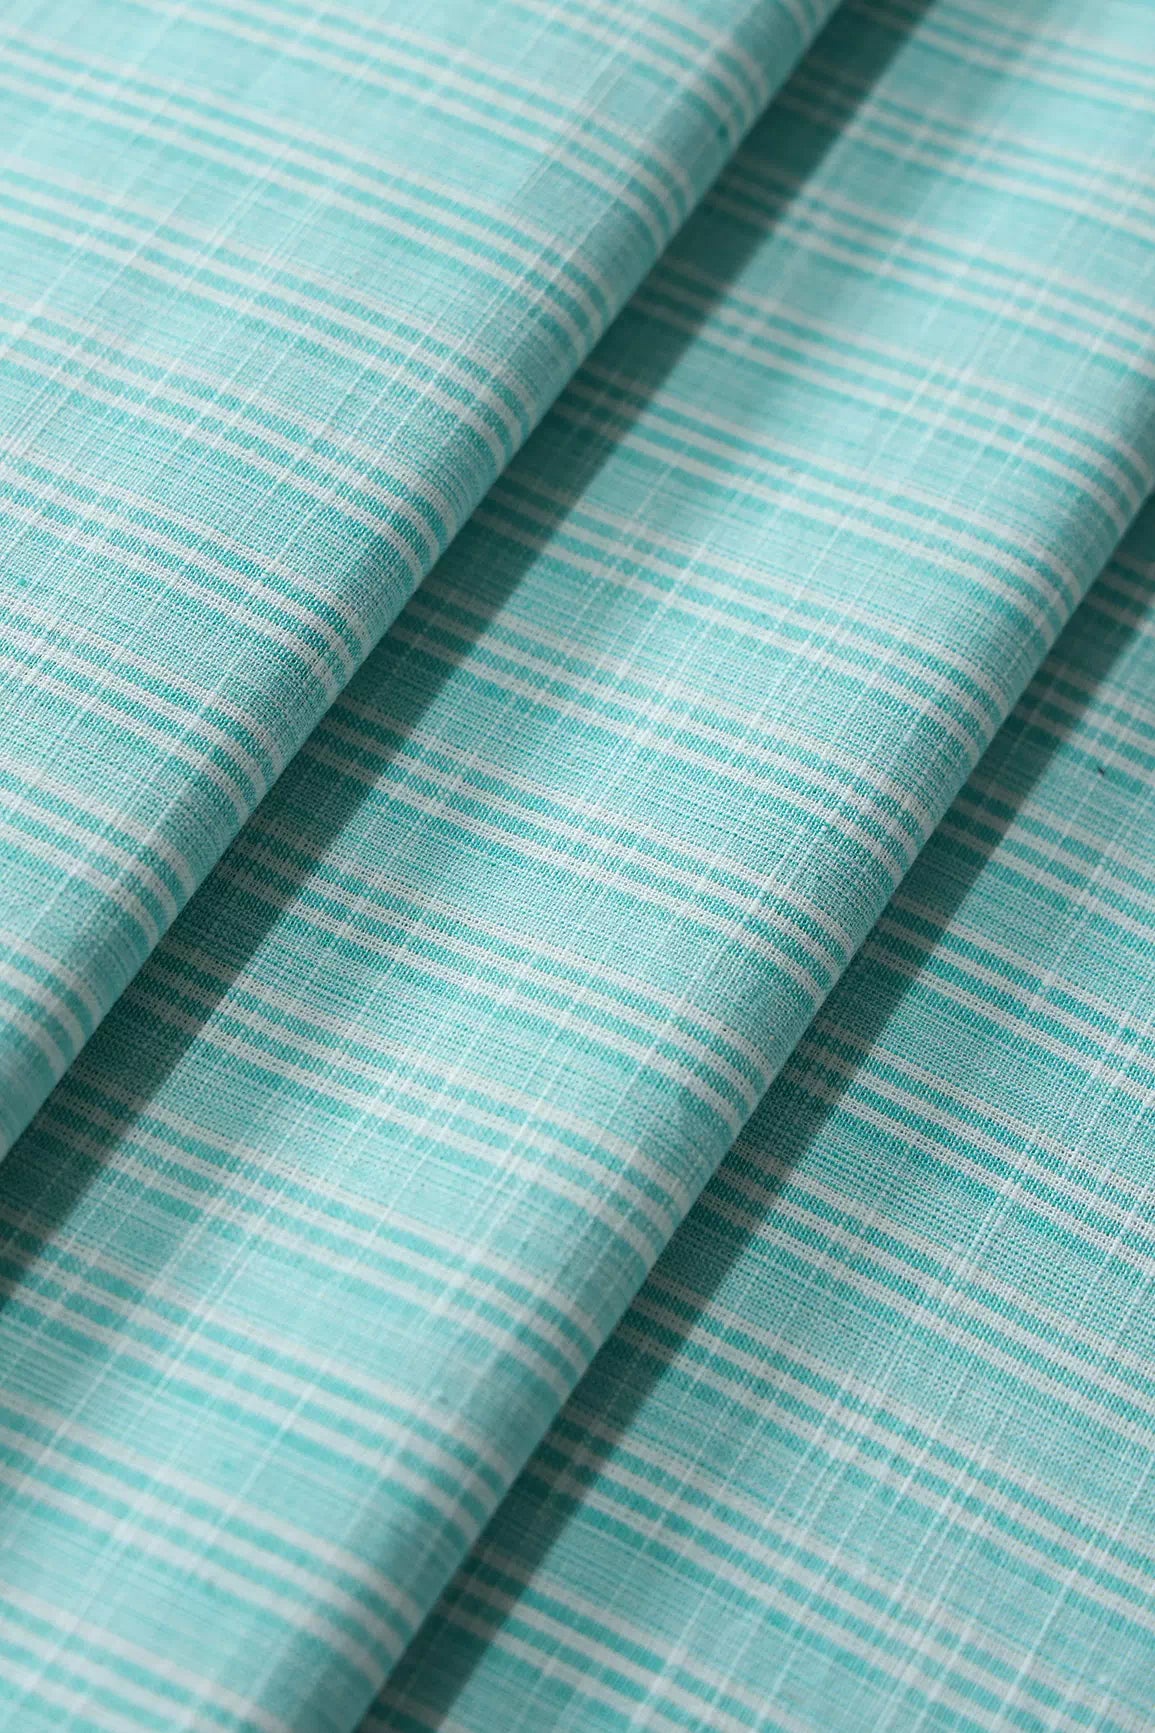 Light Sky And White Stripes Pattern Handwoven Organic Cotton Fabric